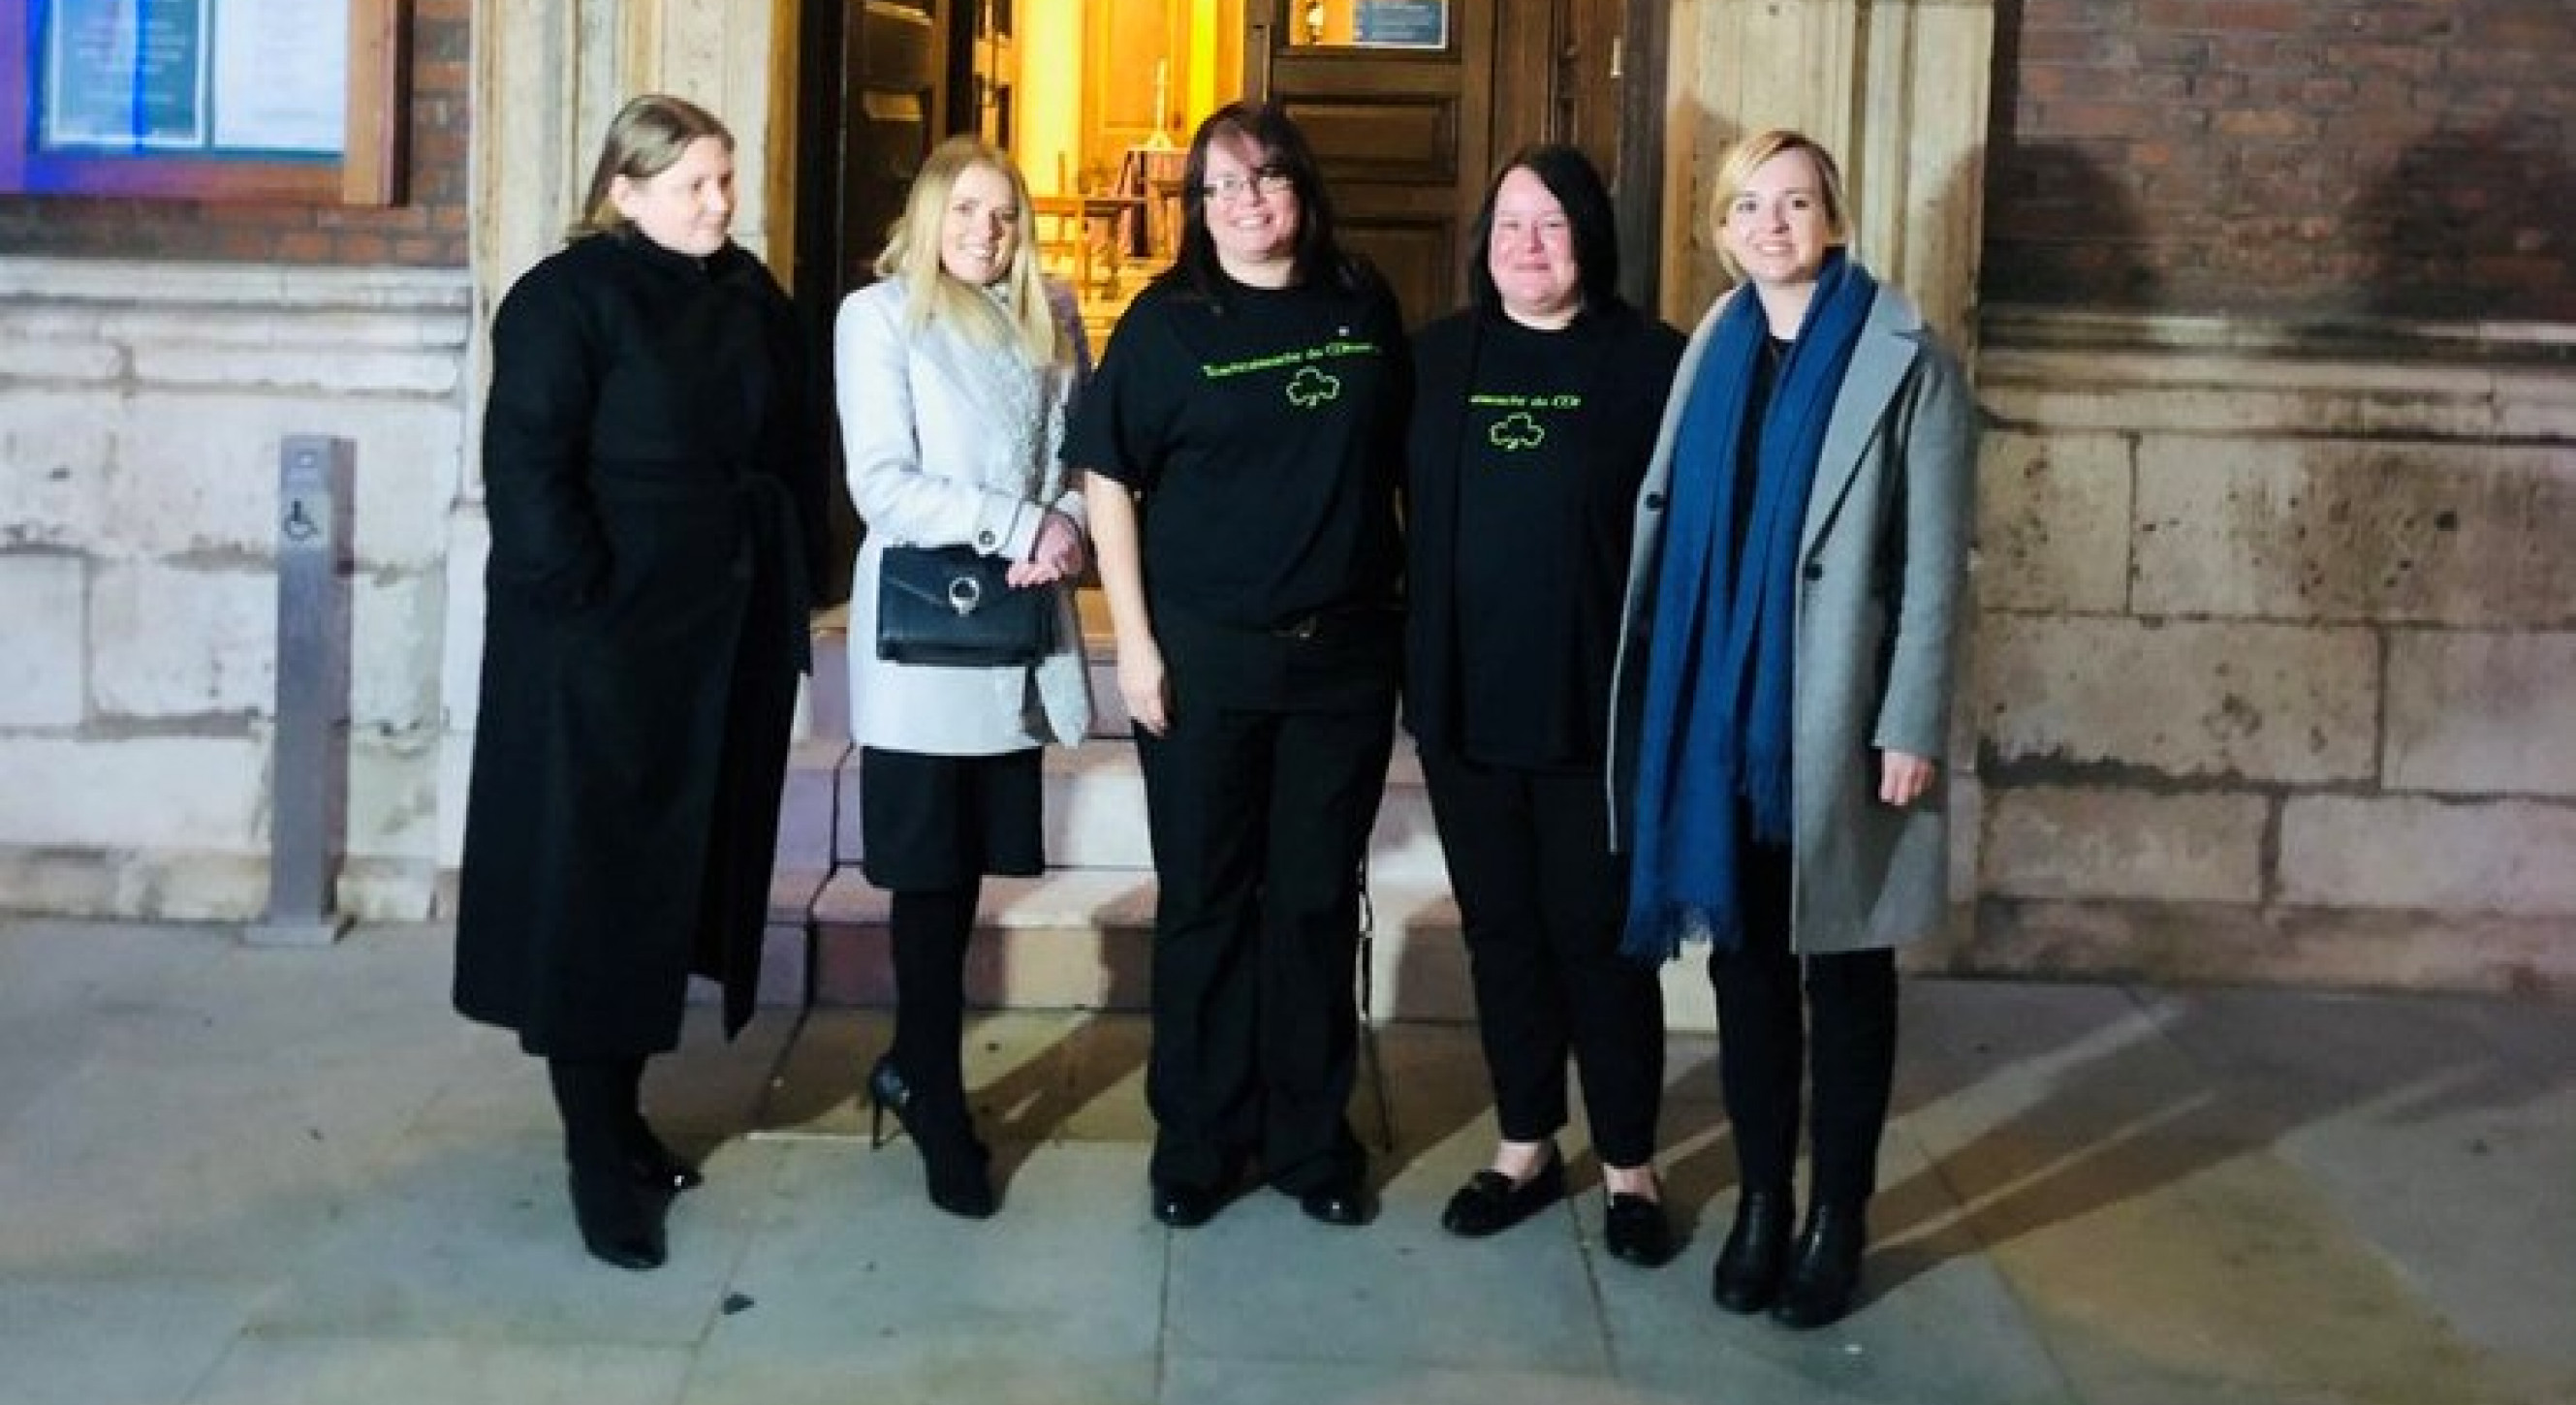 The Keane family (in campaign tee shirts) with their legal team after their appeal victory, from left: Caoilfhionn Gallagher QC, Caroline Brogan, Bez Killeen, Caroline Newey, Mary-Rachel McCabe.